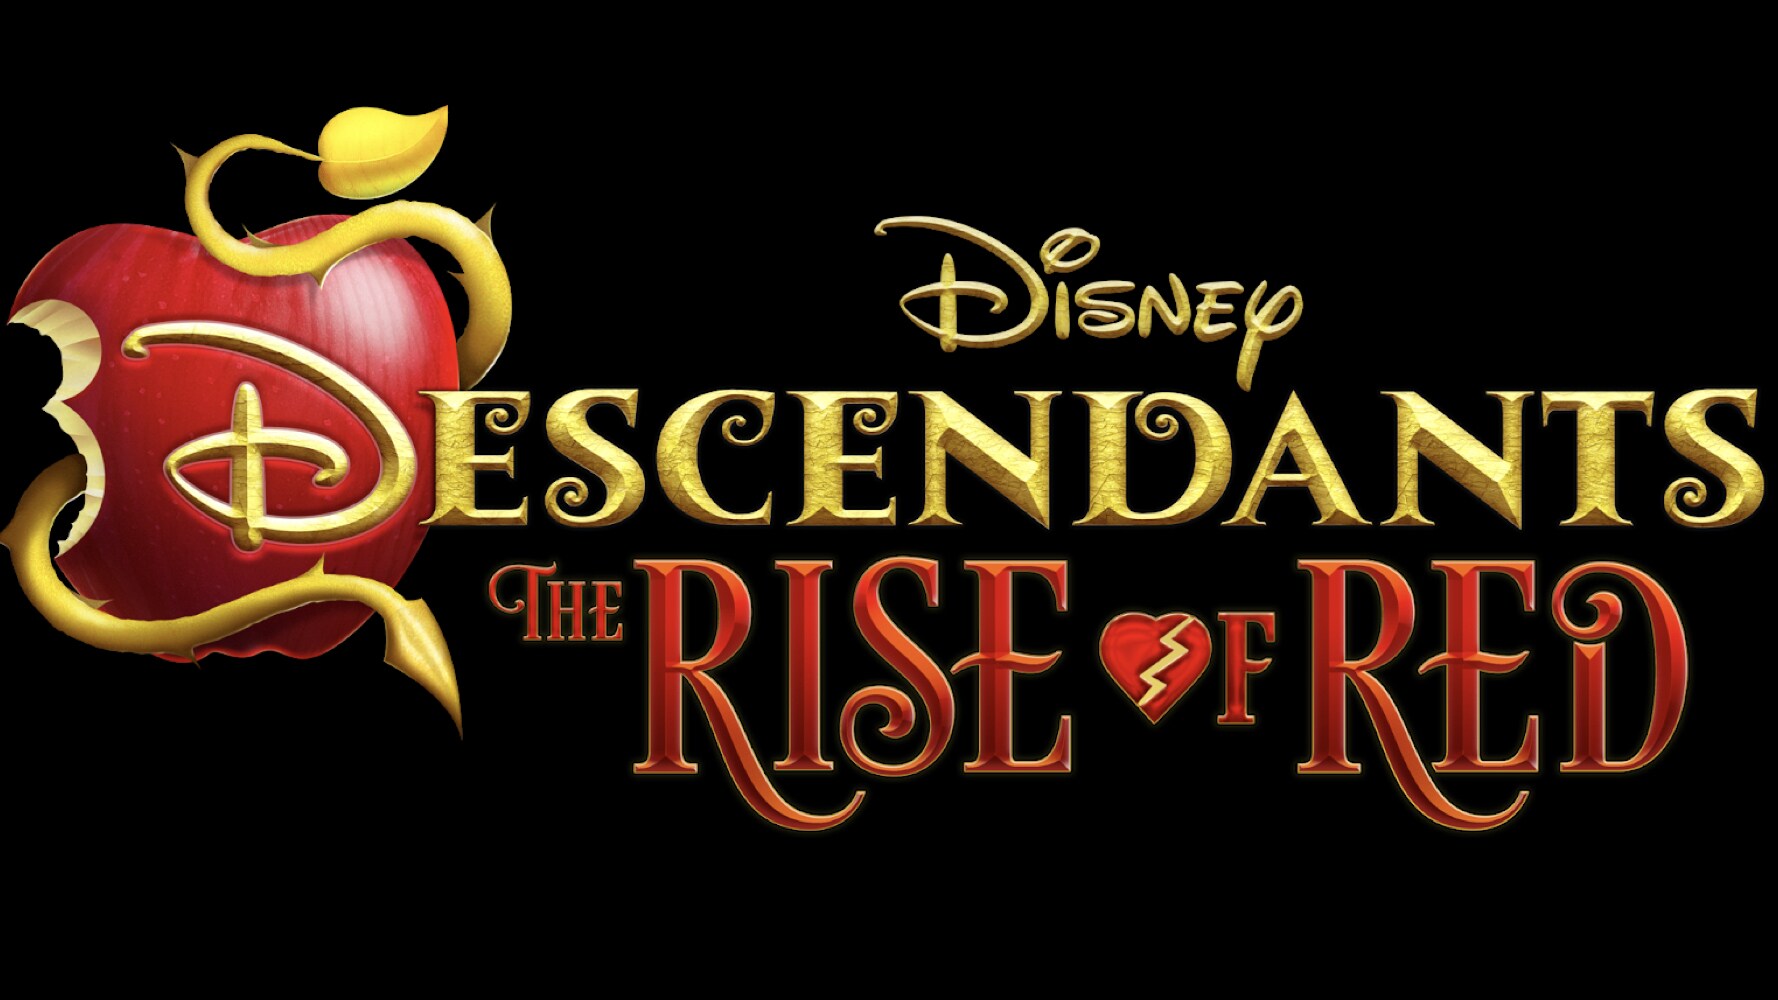 Disney+ Shares New Teaser And Poster For ‘Descendants: The Rise Of Red’